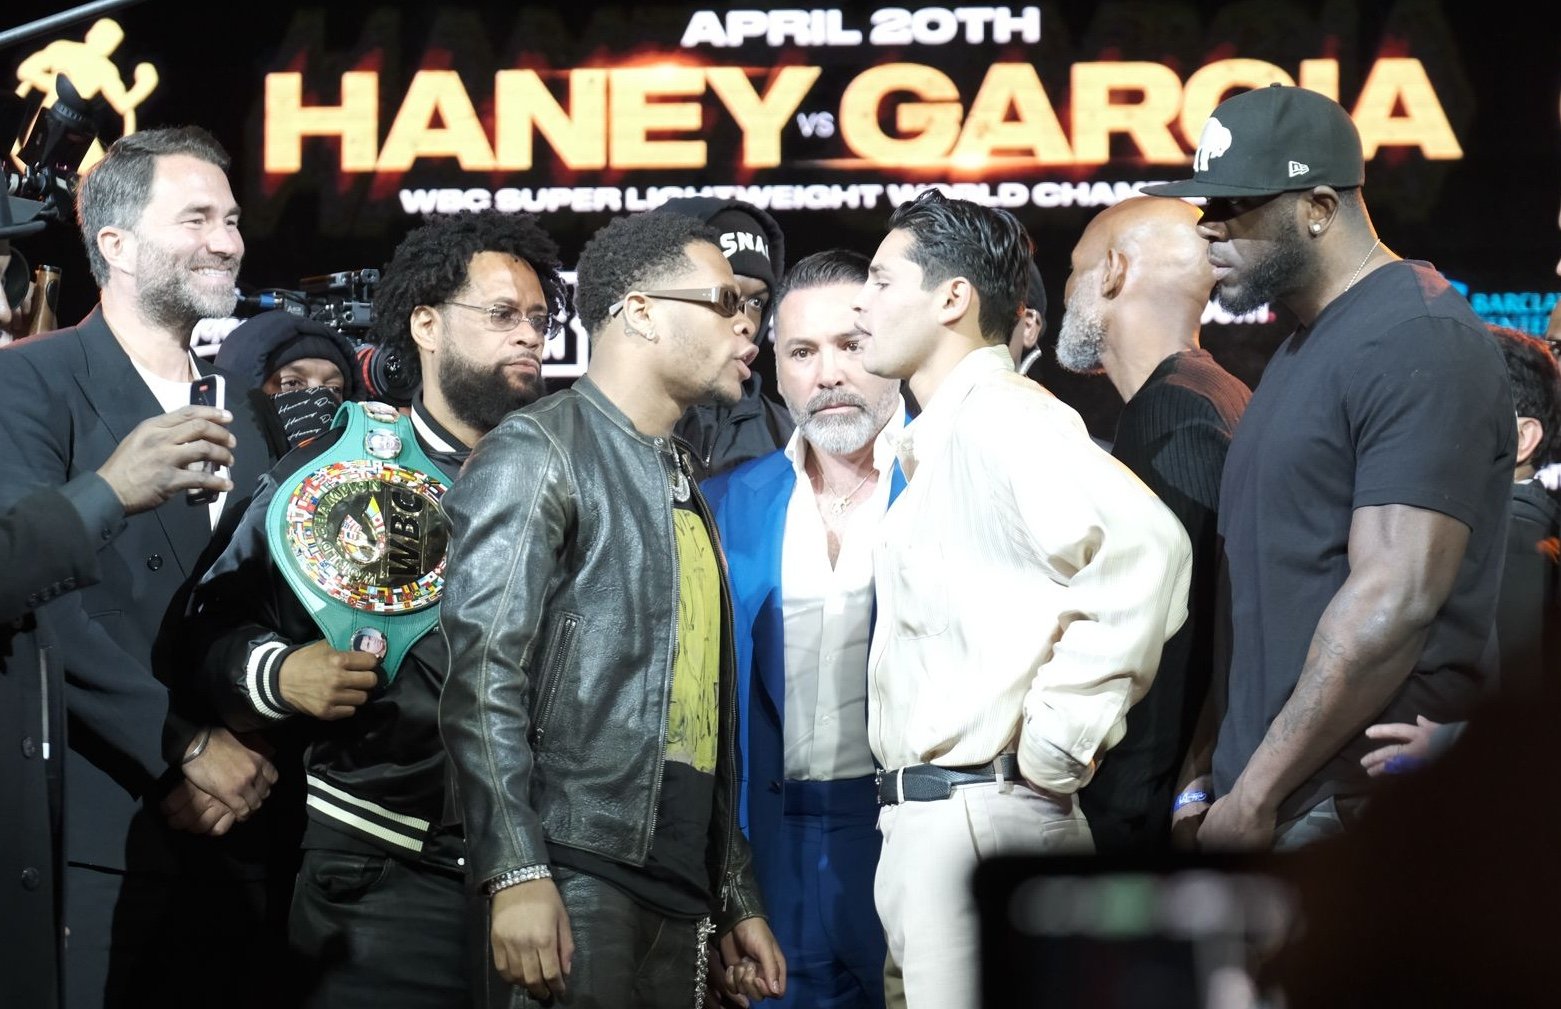 Haney-Garcia, New York’s super-fight comeback, remains in NYC